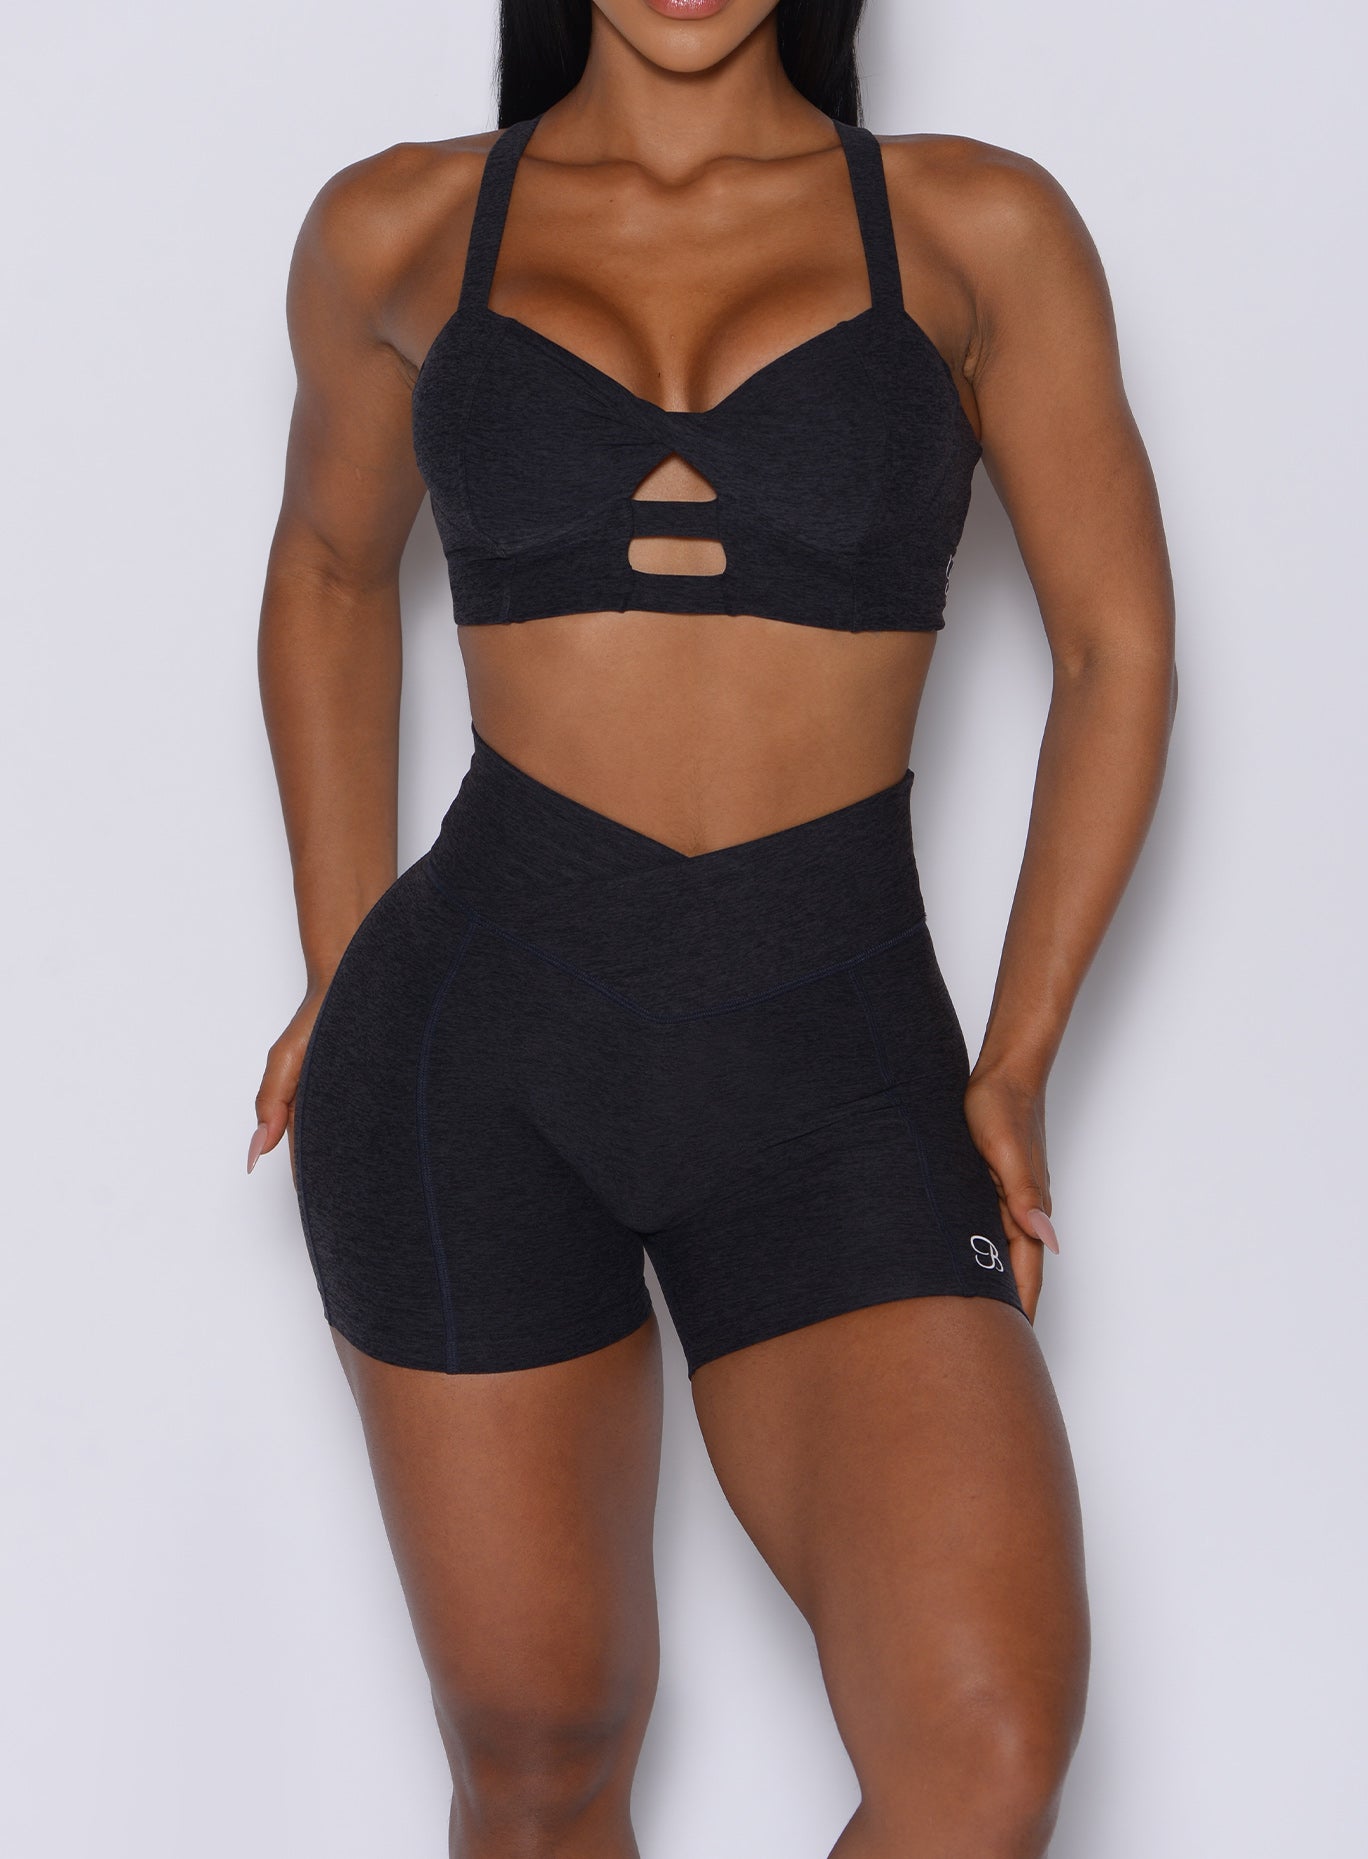 front right side profile view of a model wearing our black Tiny Waist Shorts along with the matching bra